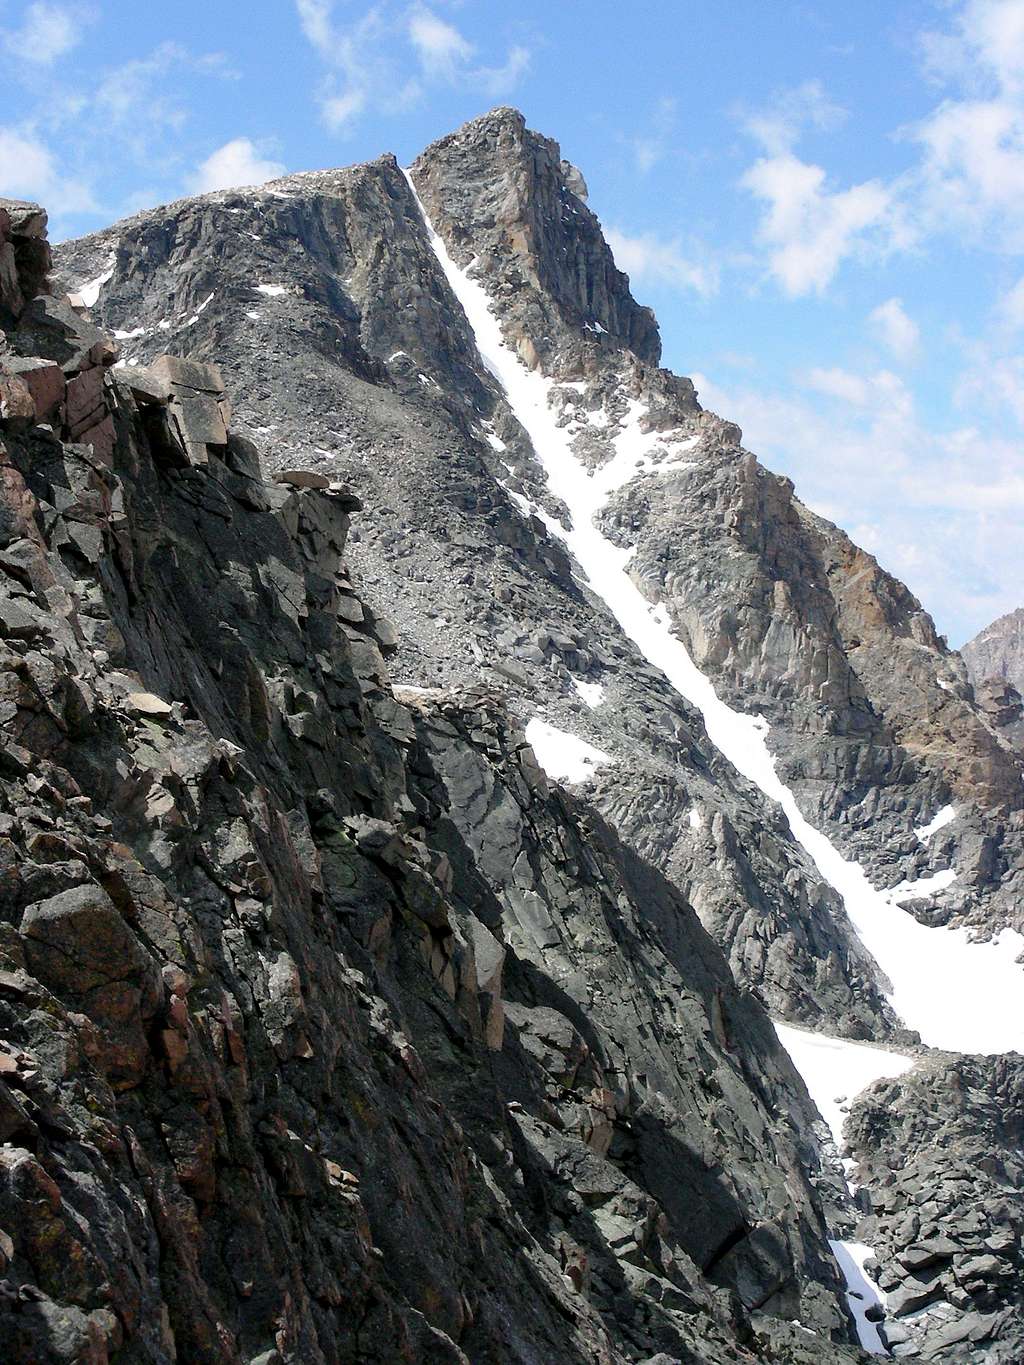 Whitetail Peak and Couloir